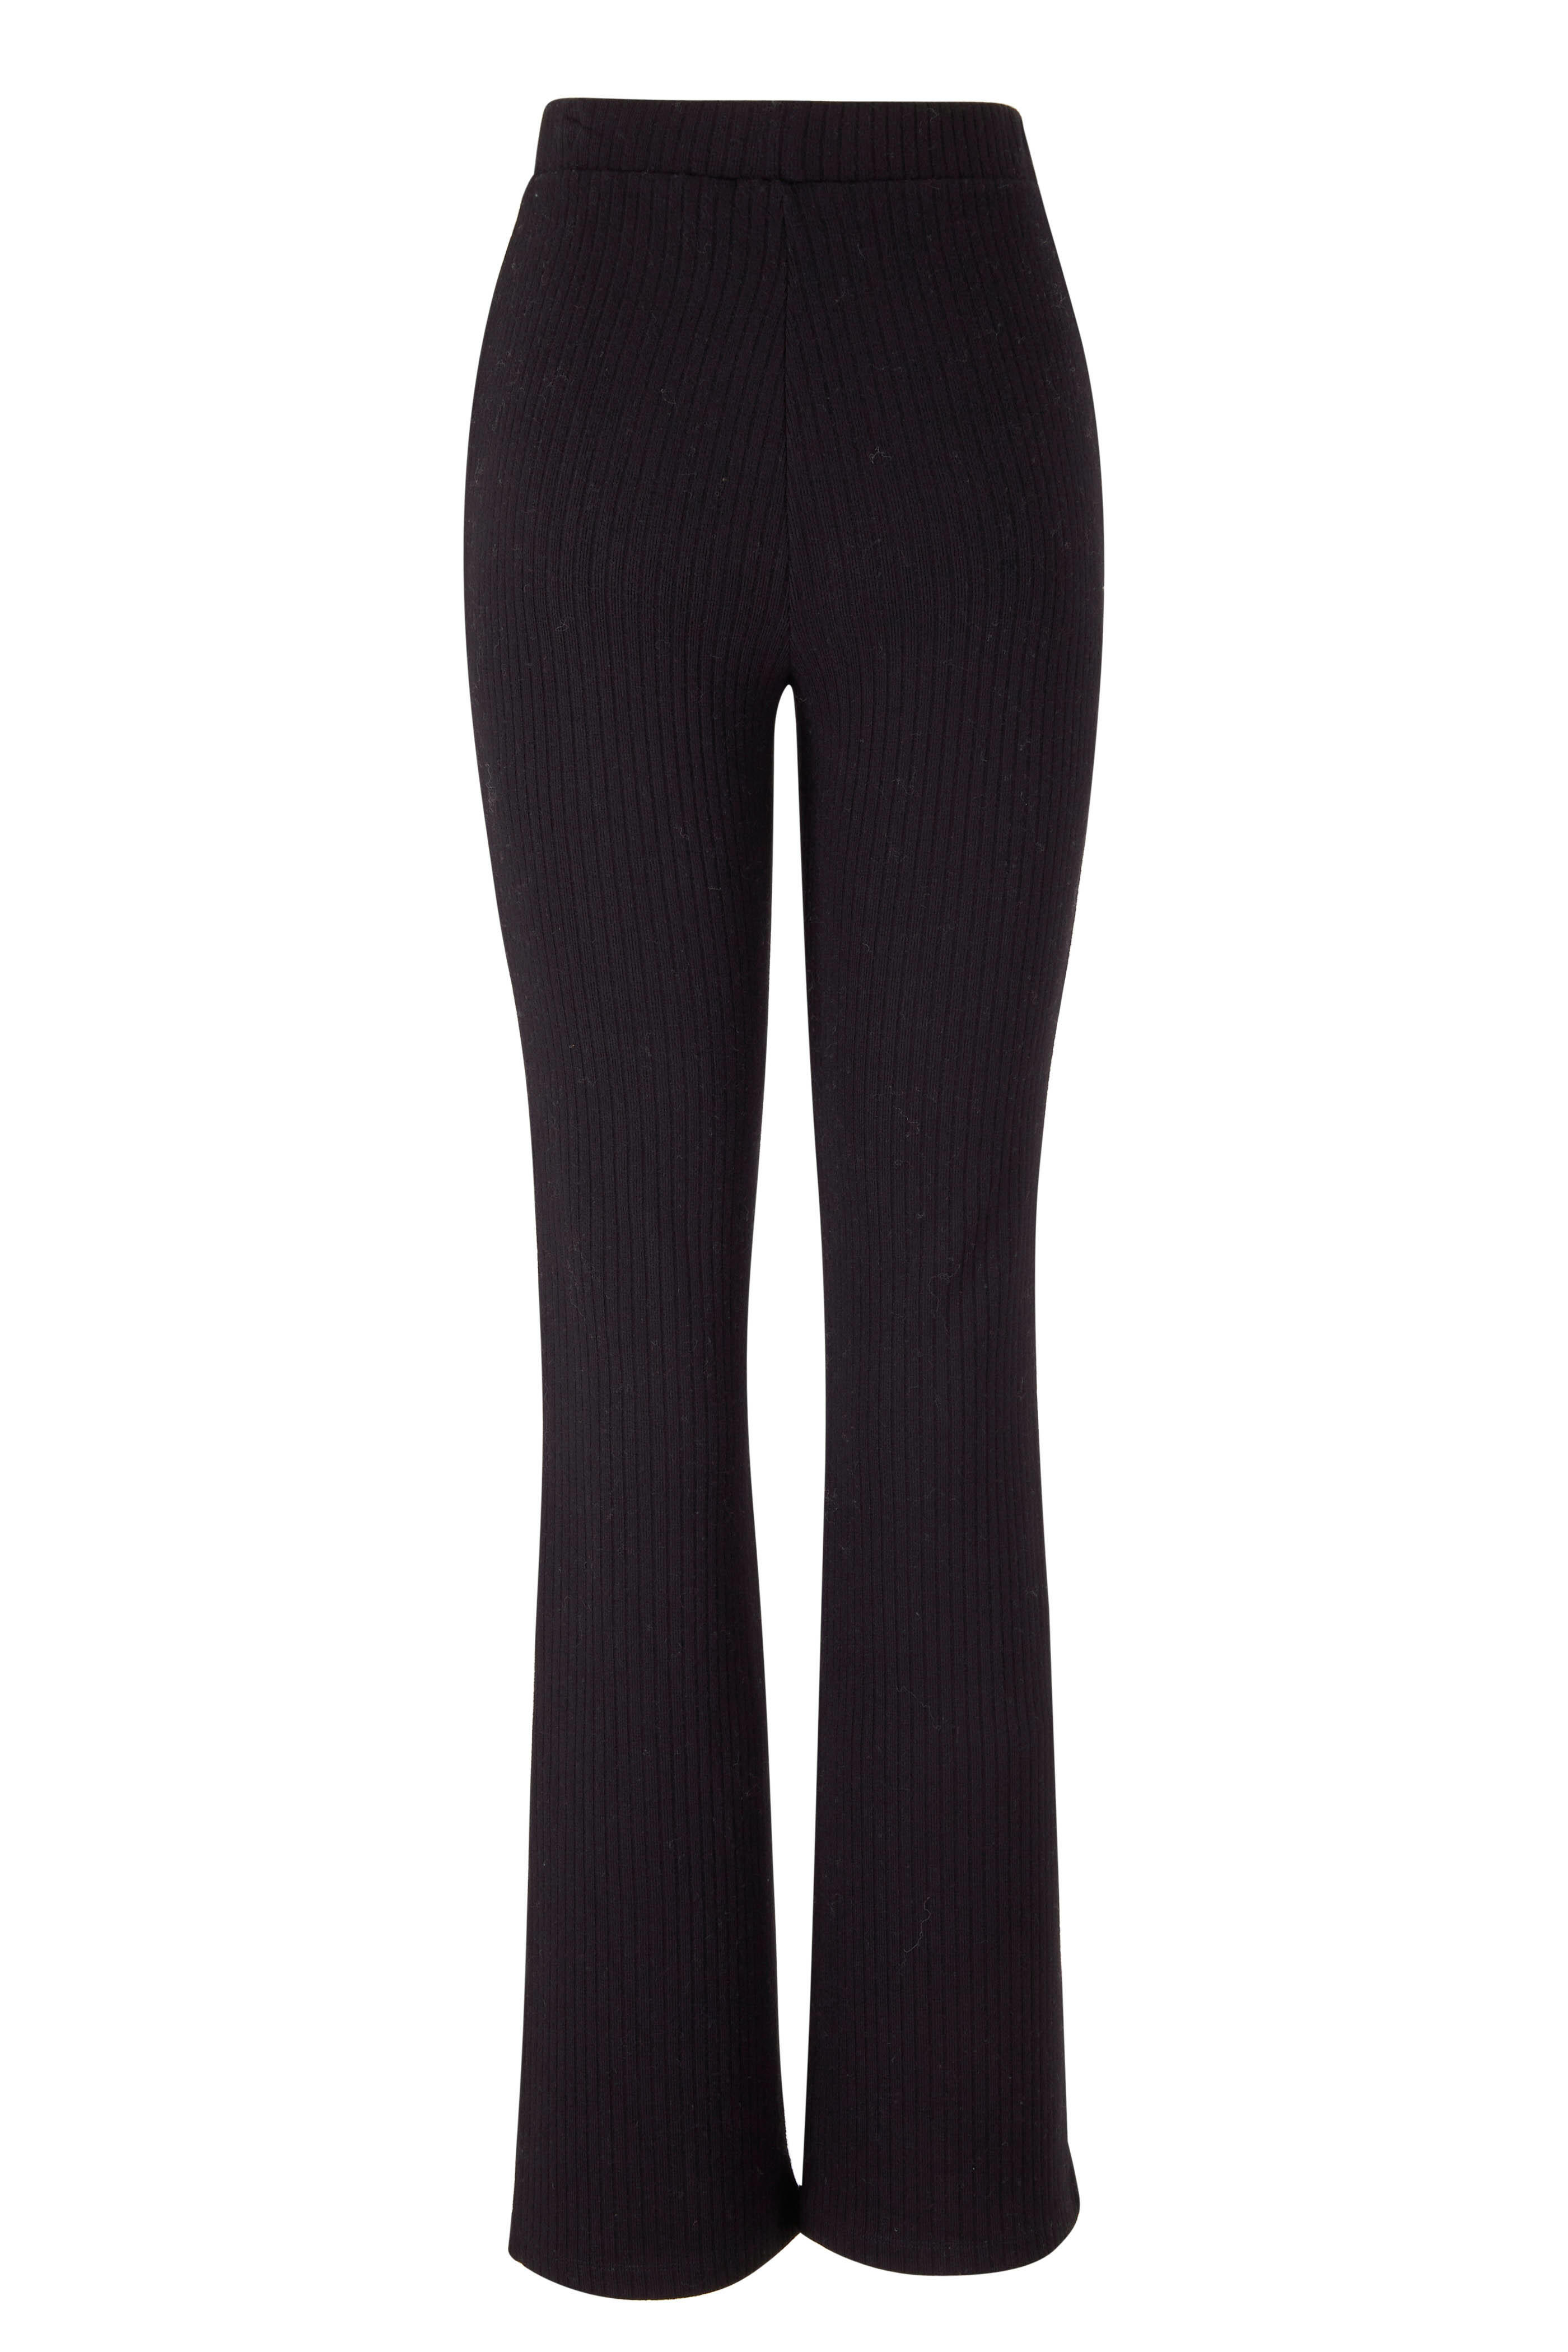 Vince - Black Ribbed Flare Pant | Mitchell Stores